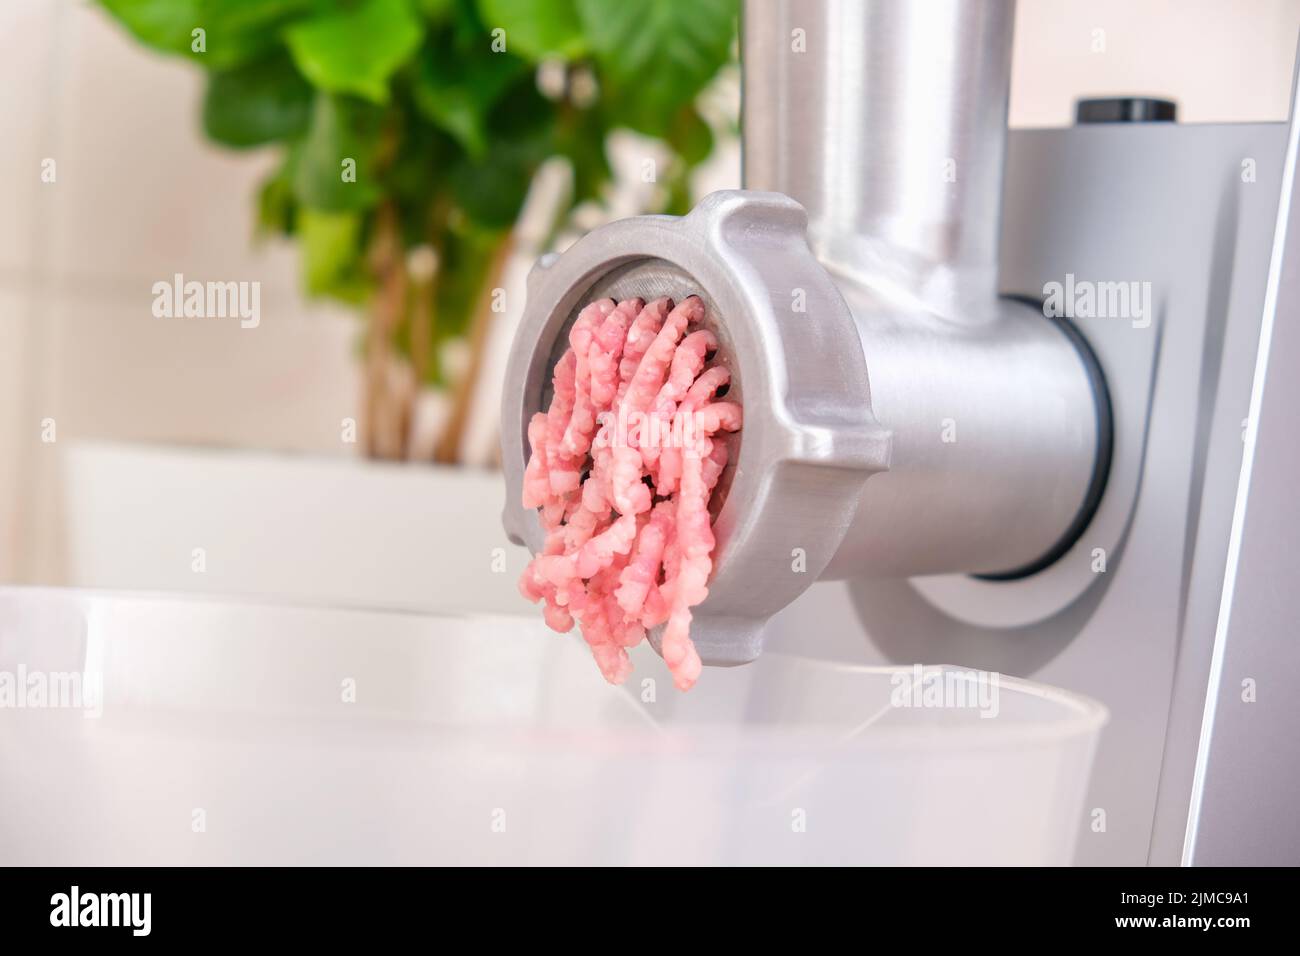 https://c8.alamy.com/comp/2JMC9A1/a-man-processes-meat-in-an-electric-meat-grinder-preparation-of-minced-beef-and-pork-for-cutlets-meatballs-chops-2JMC9A1.jpg